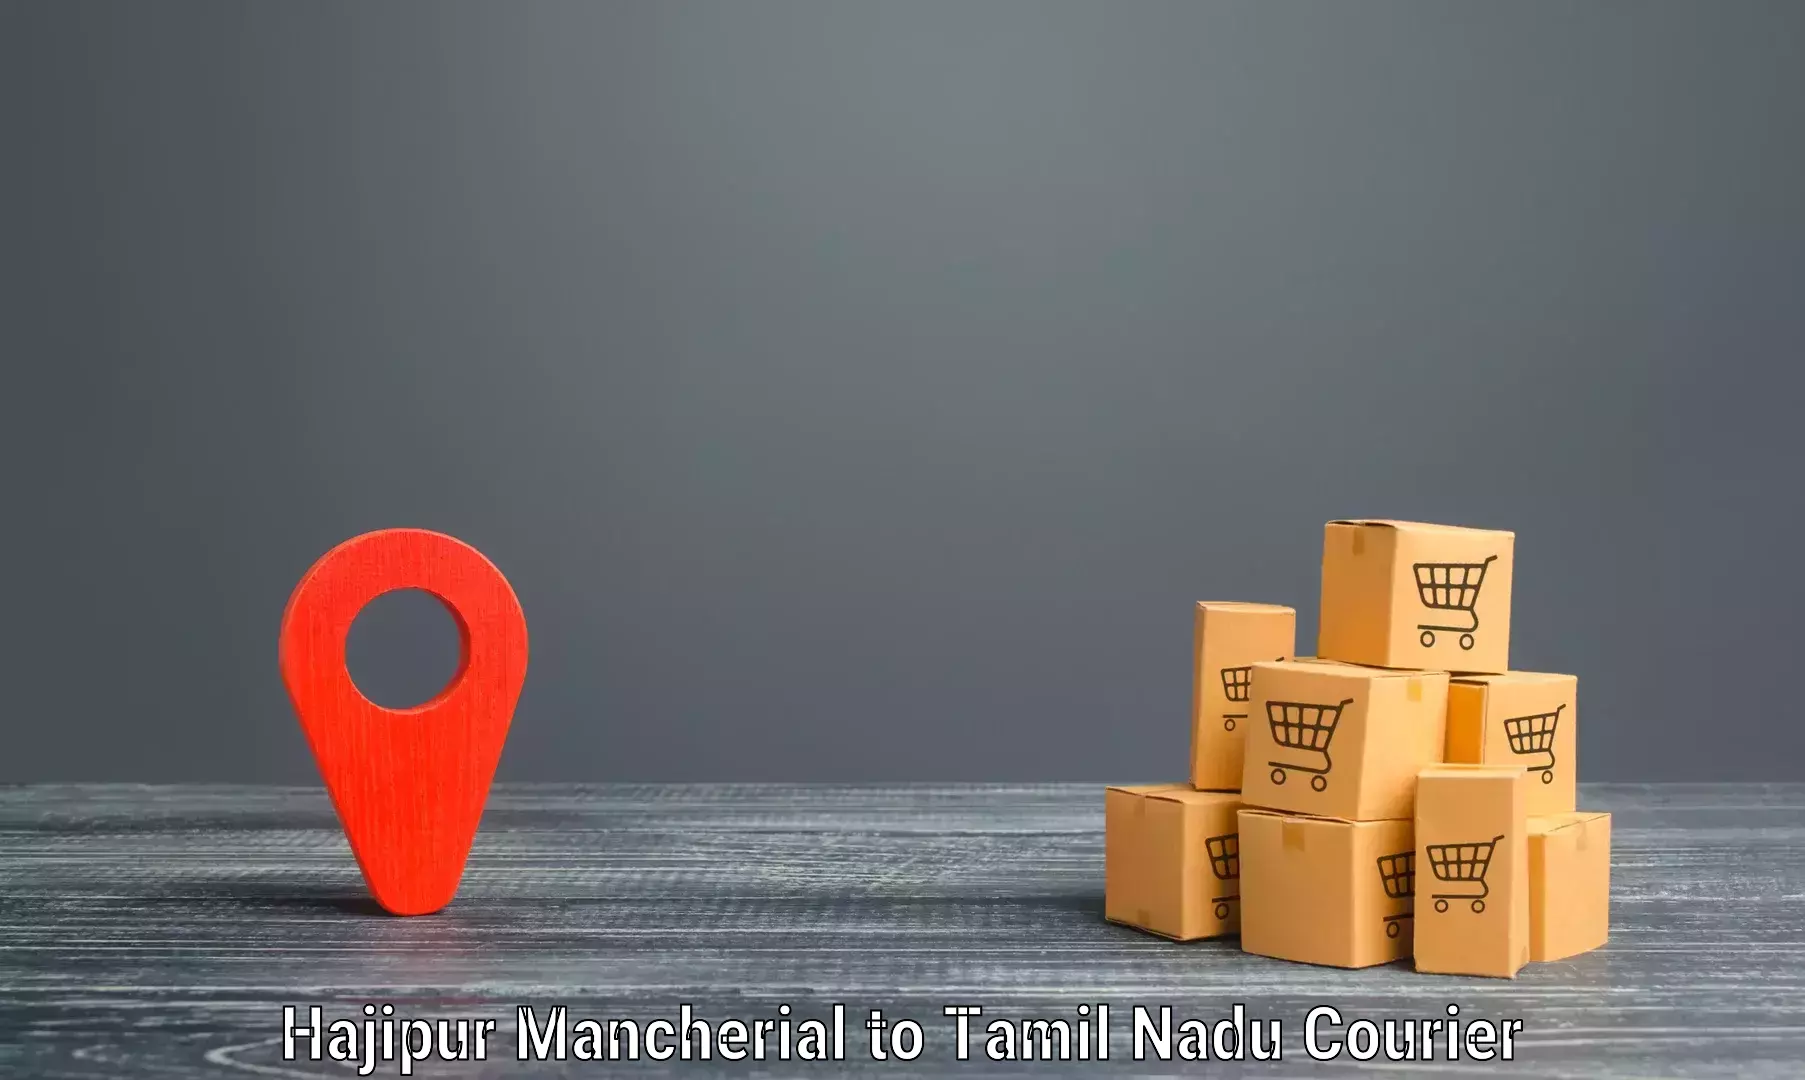 High-capacity courier solutions Hajipur Mancherial to Thisayanvilai